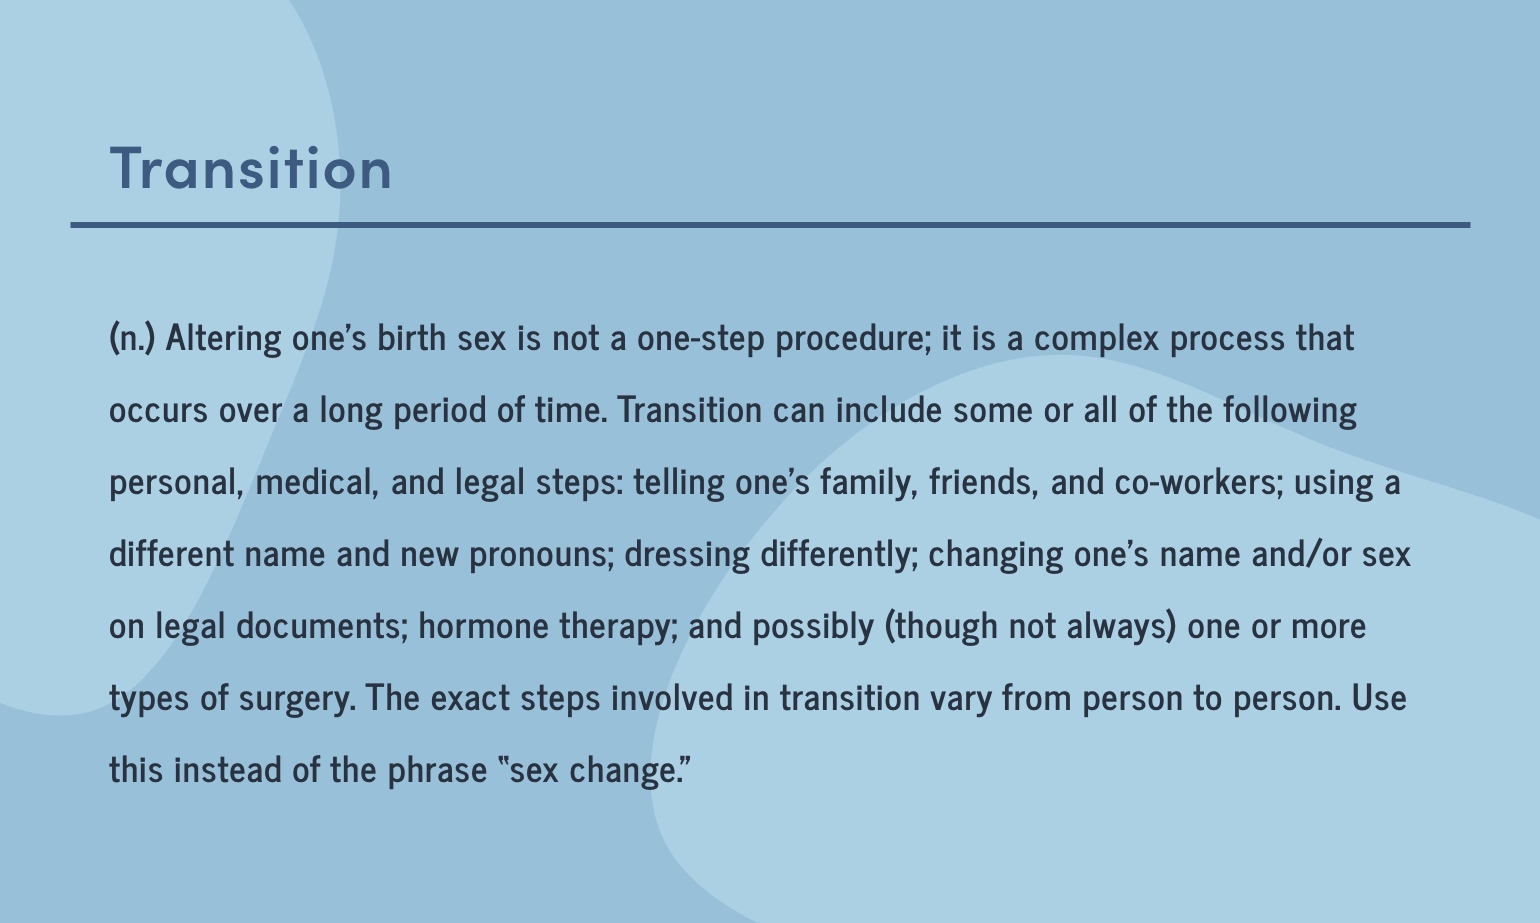 vocabulary card graphic defining the LGBTQ+ term transition